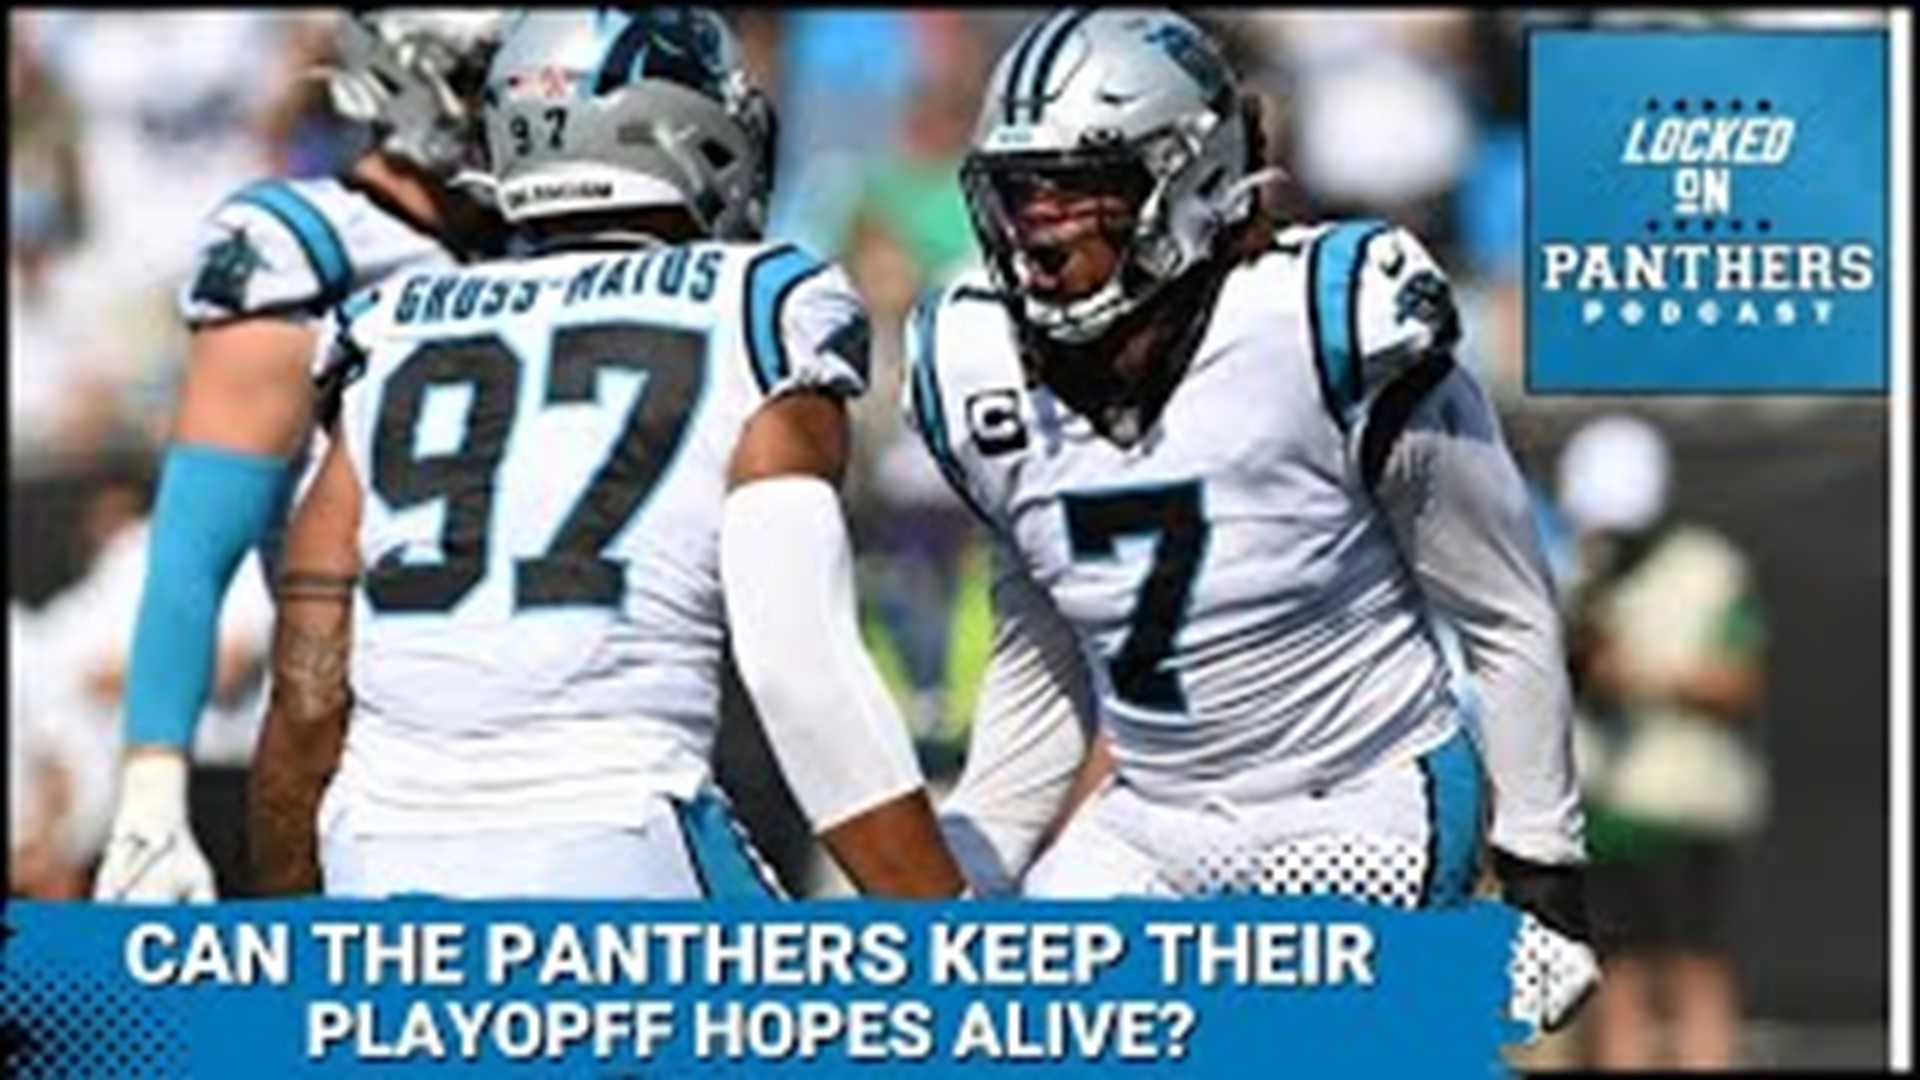 The Panthers face a must-win on Sunday in Seattle. Can they finally win a game on the road and keep their NFC South hopes alive? That and more on Locked On Panthers